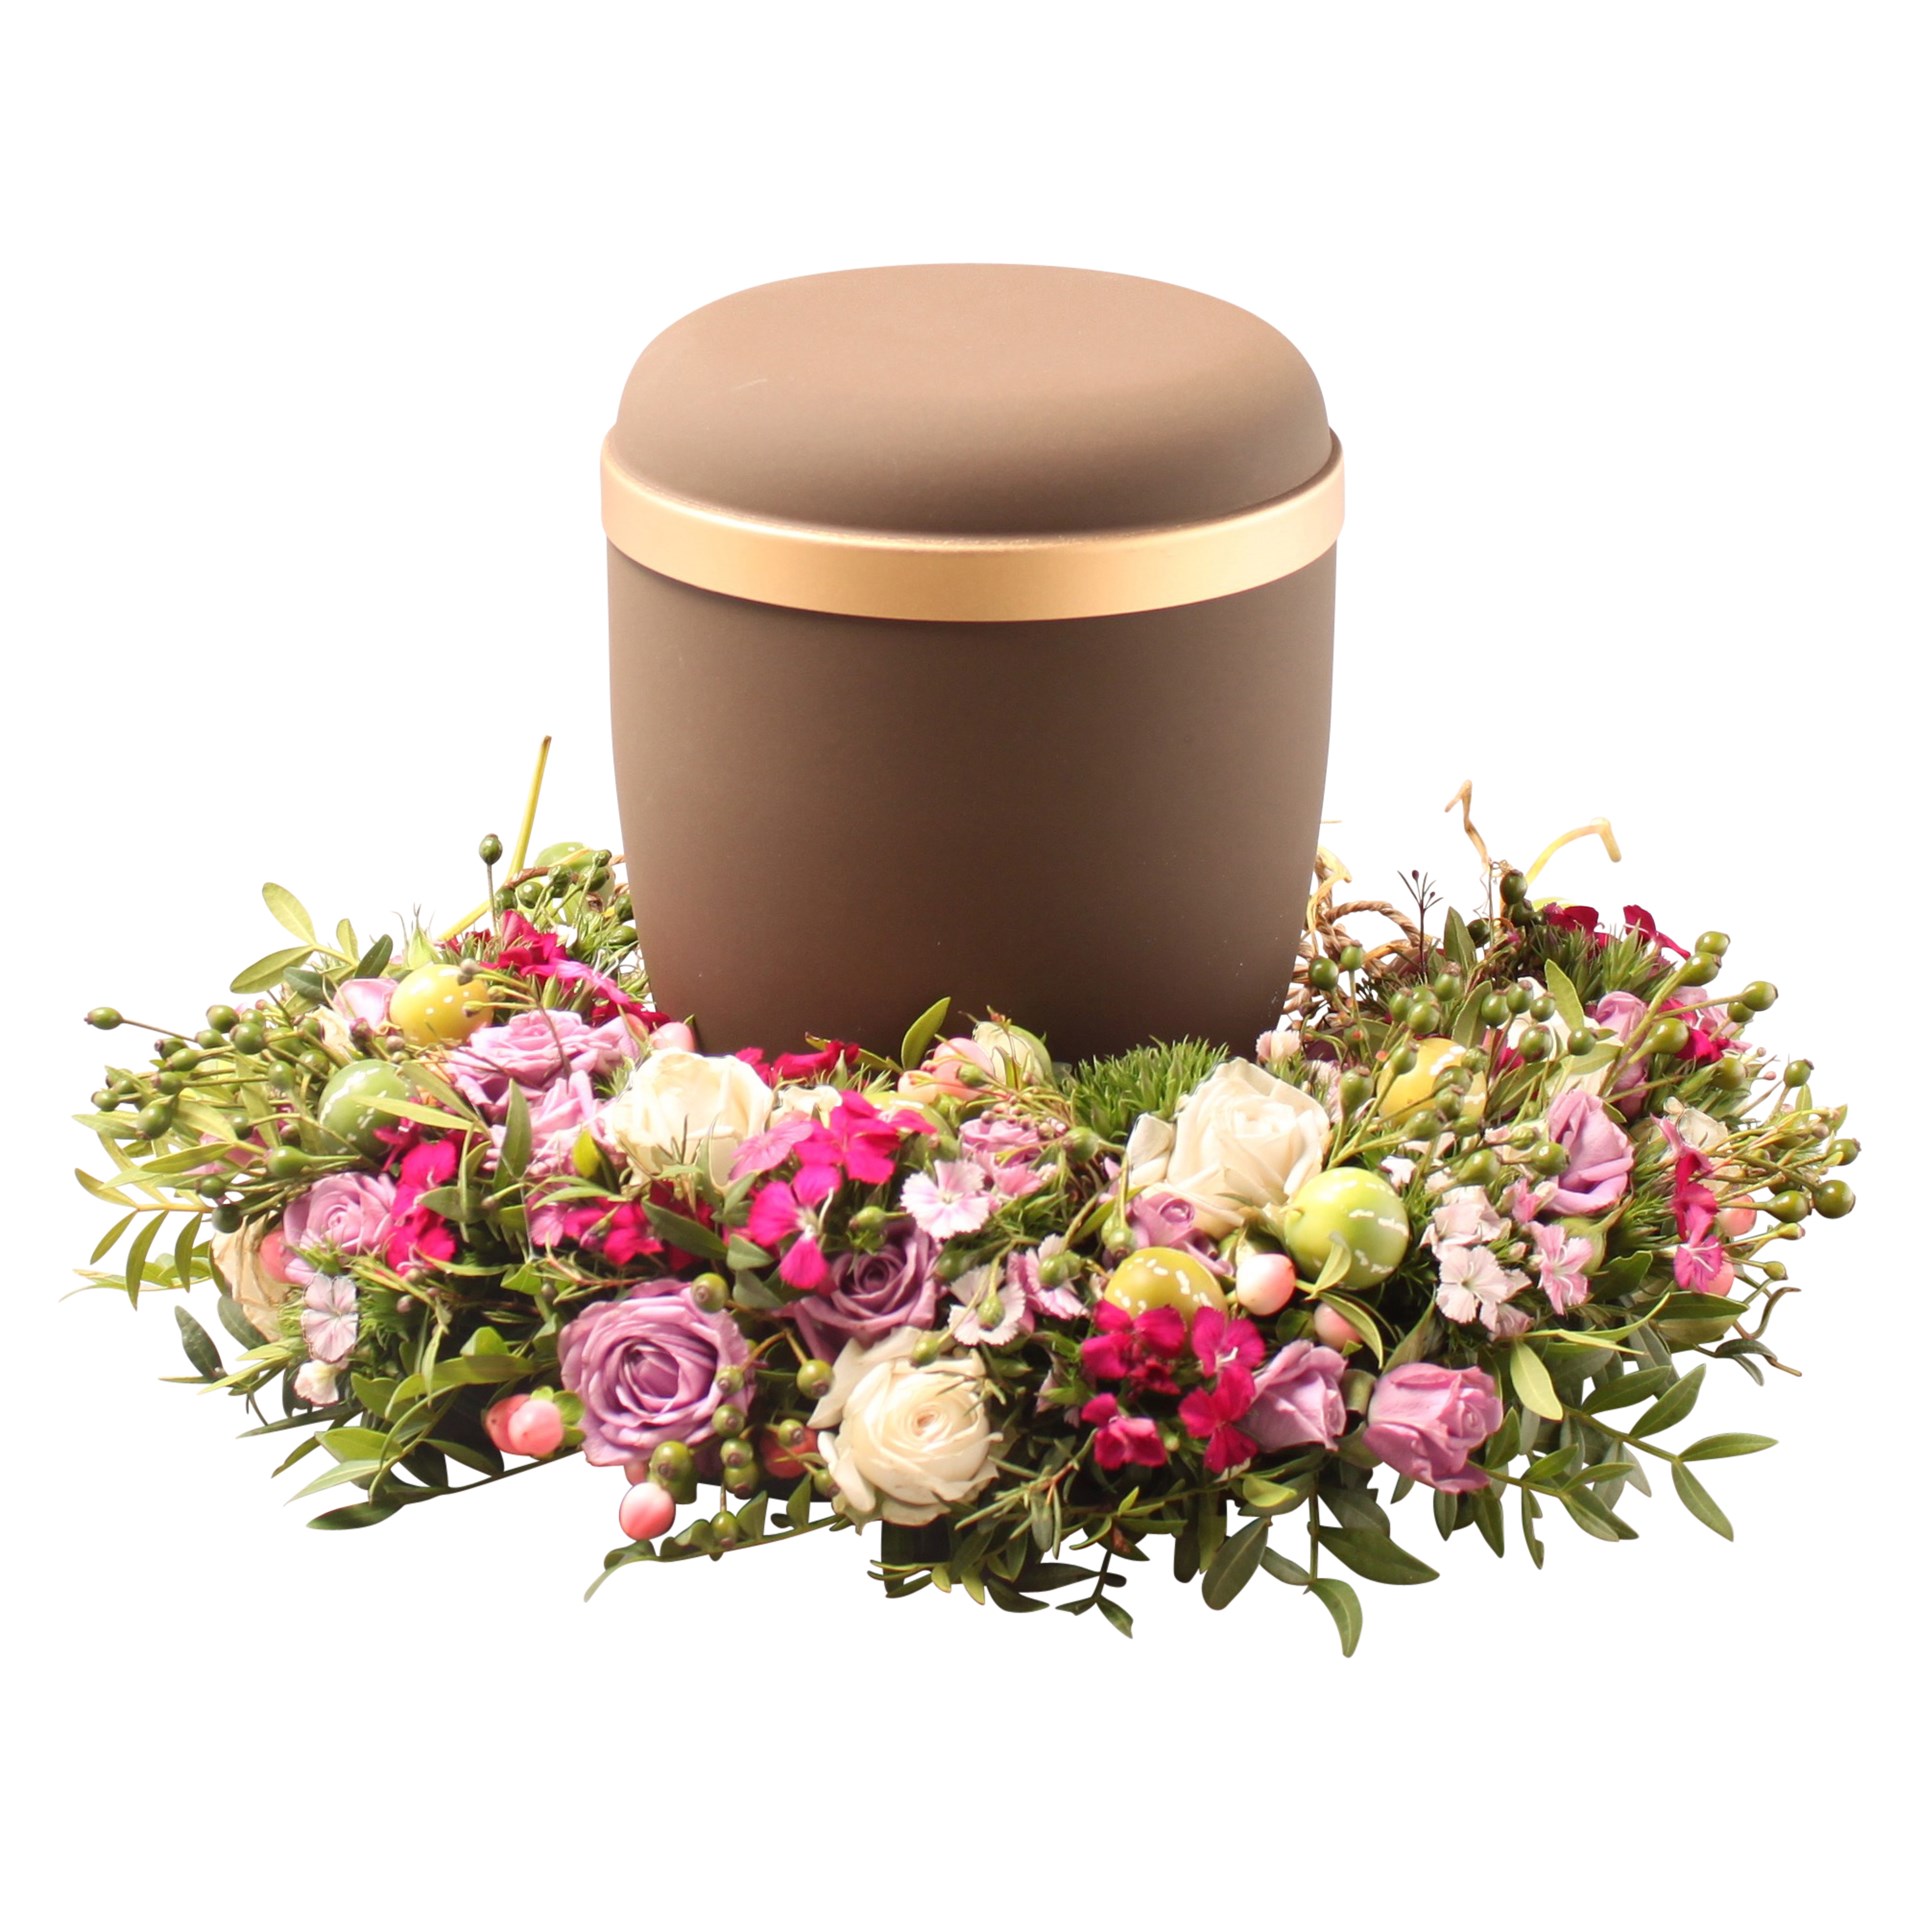 product image for Urn decoration - excl. urn